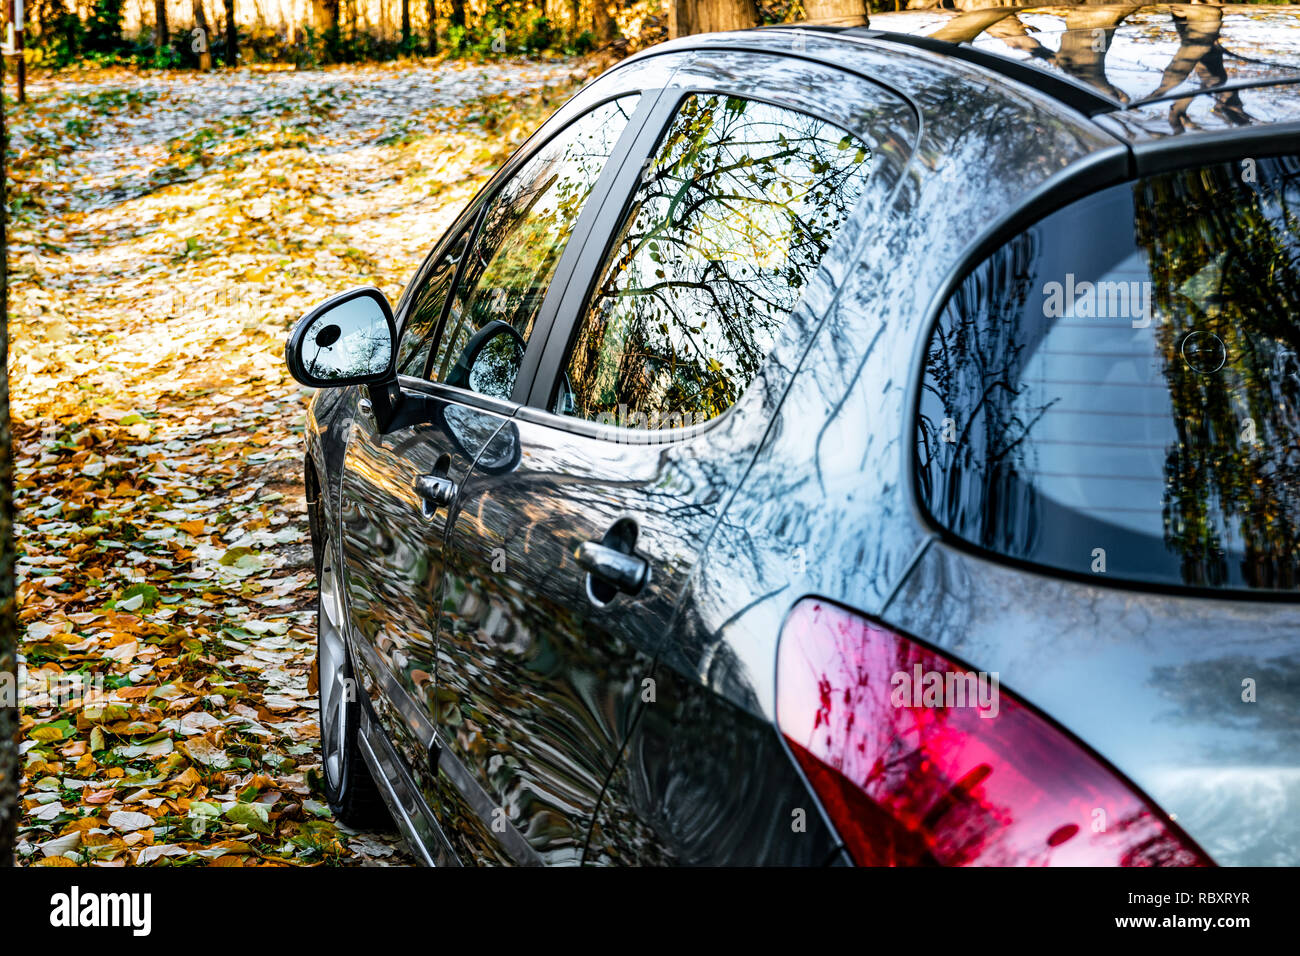 Belgrade, Serbia - 11.21.2018 / Peugeot 308 2.0 HDI, parked on a forest road,  which is covered with leaves. Gray car color, and large alloy wheels. Stock Photo